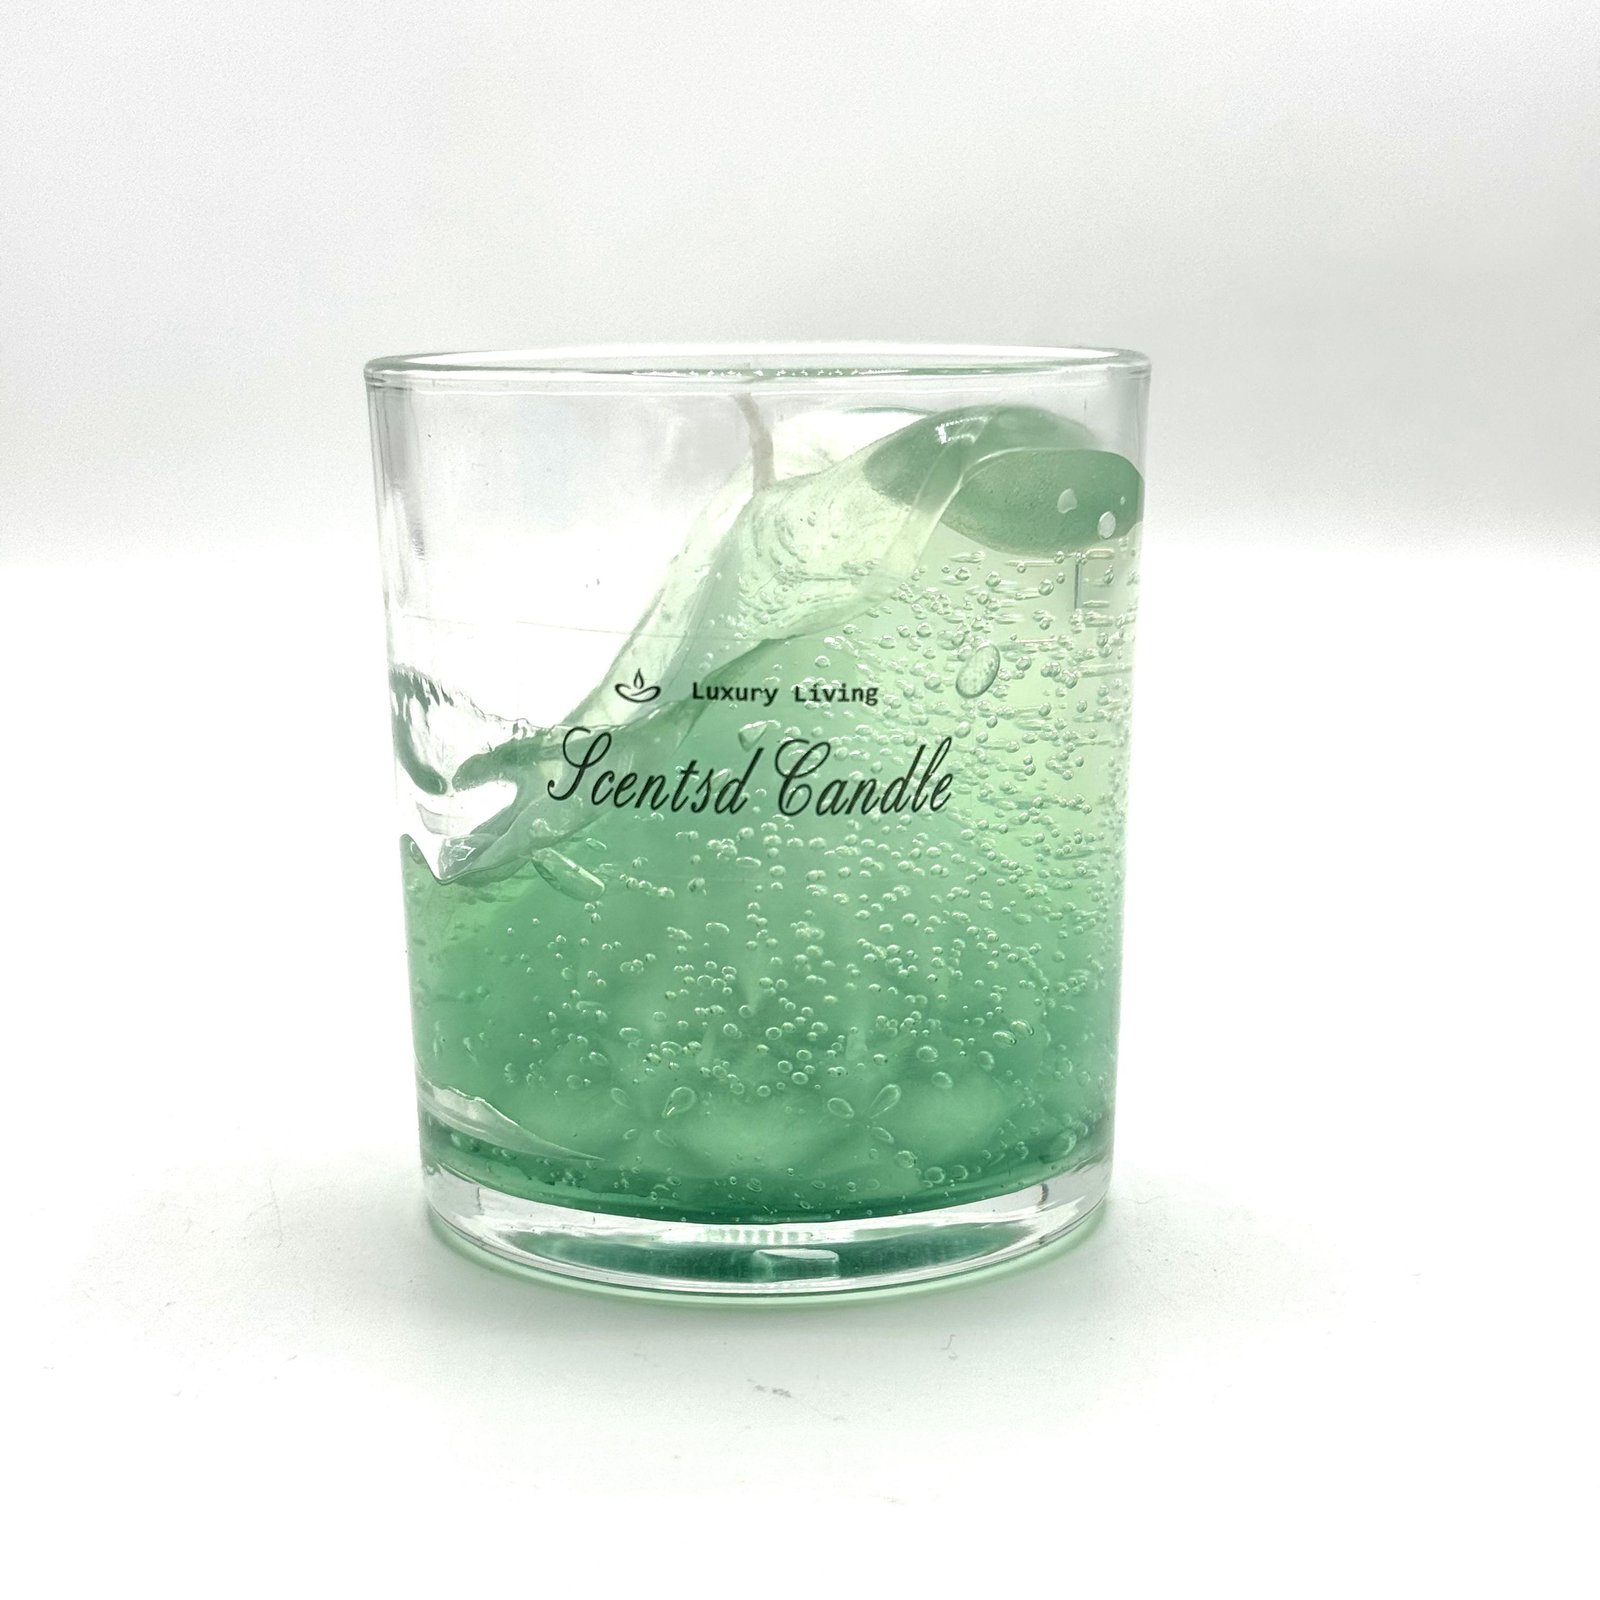 Decor Scented Candle ART-N-1879